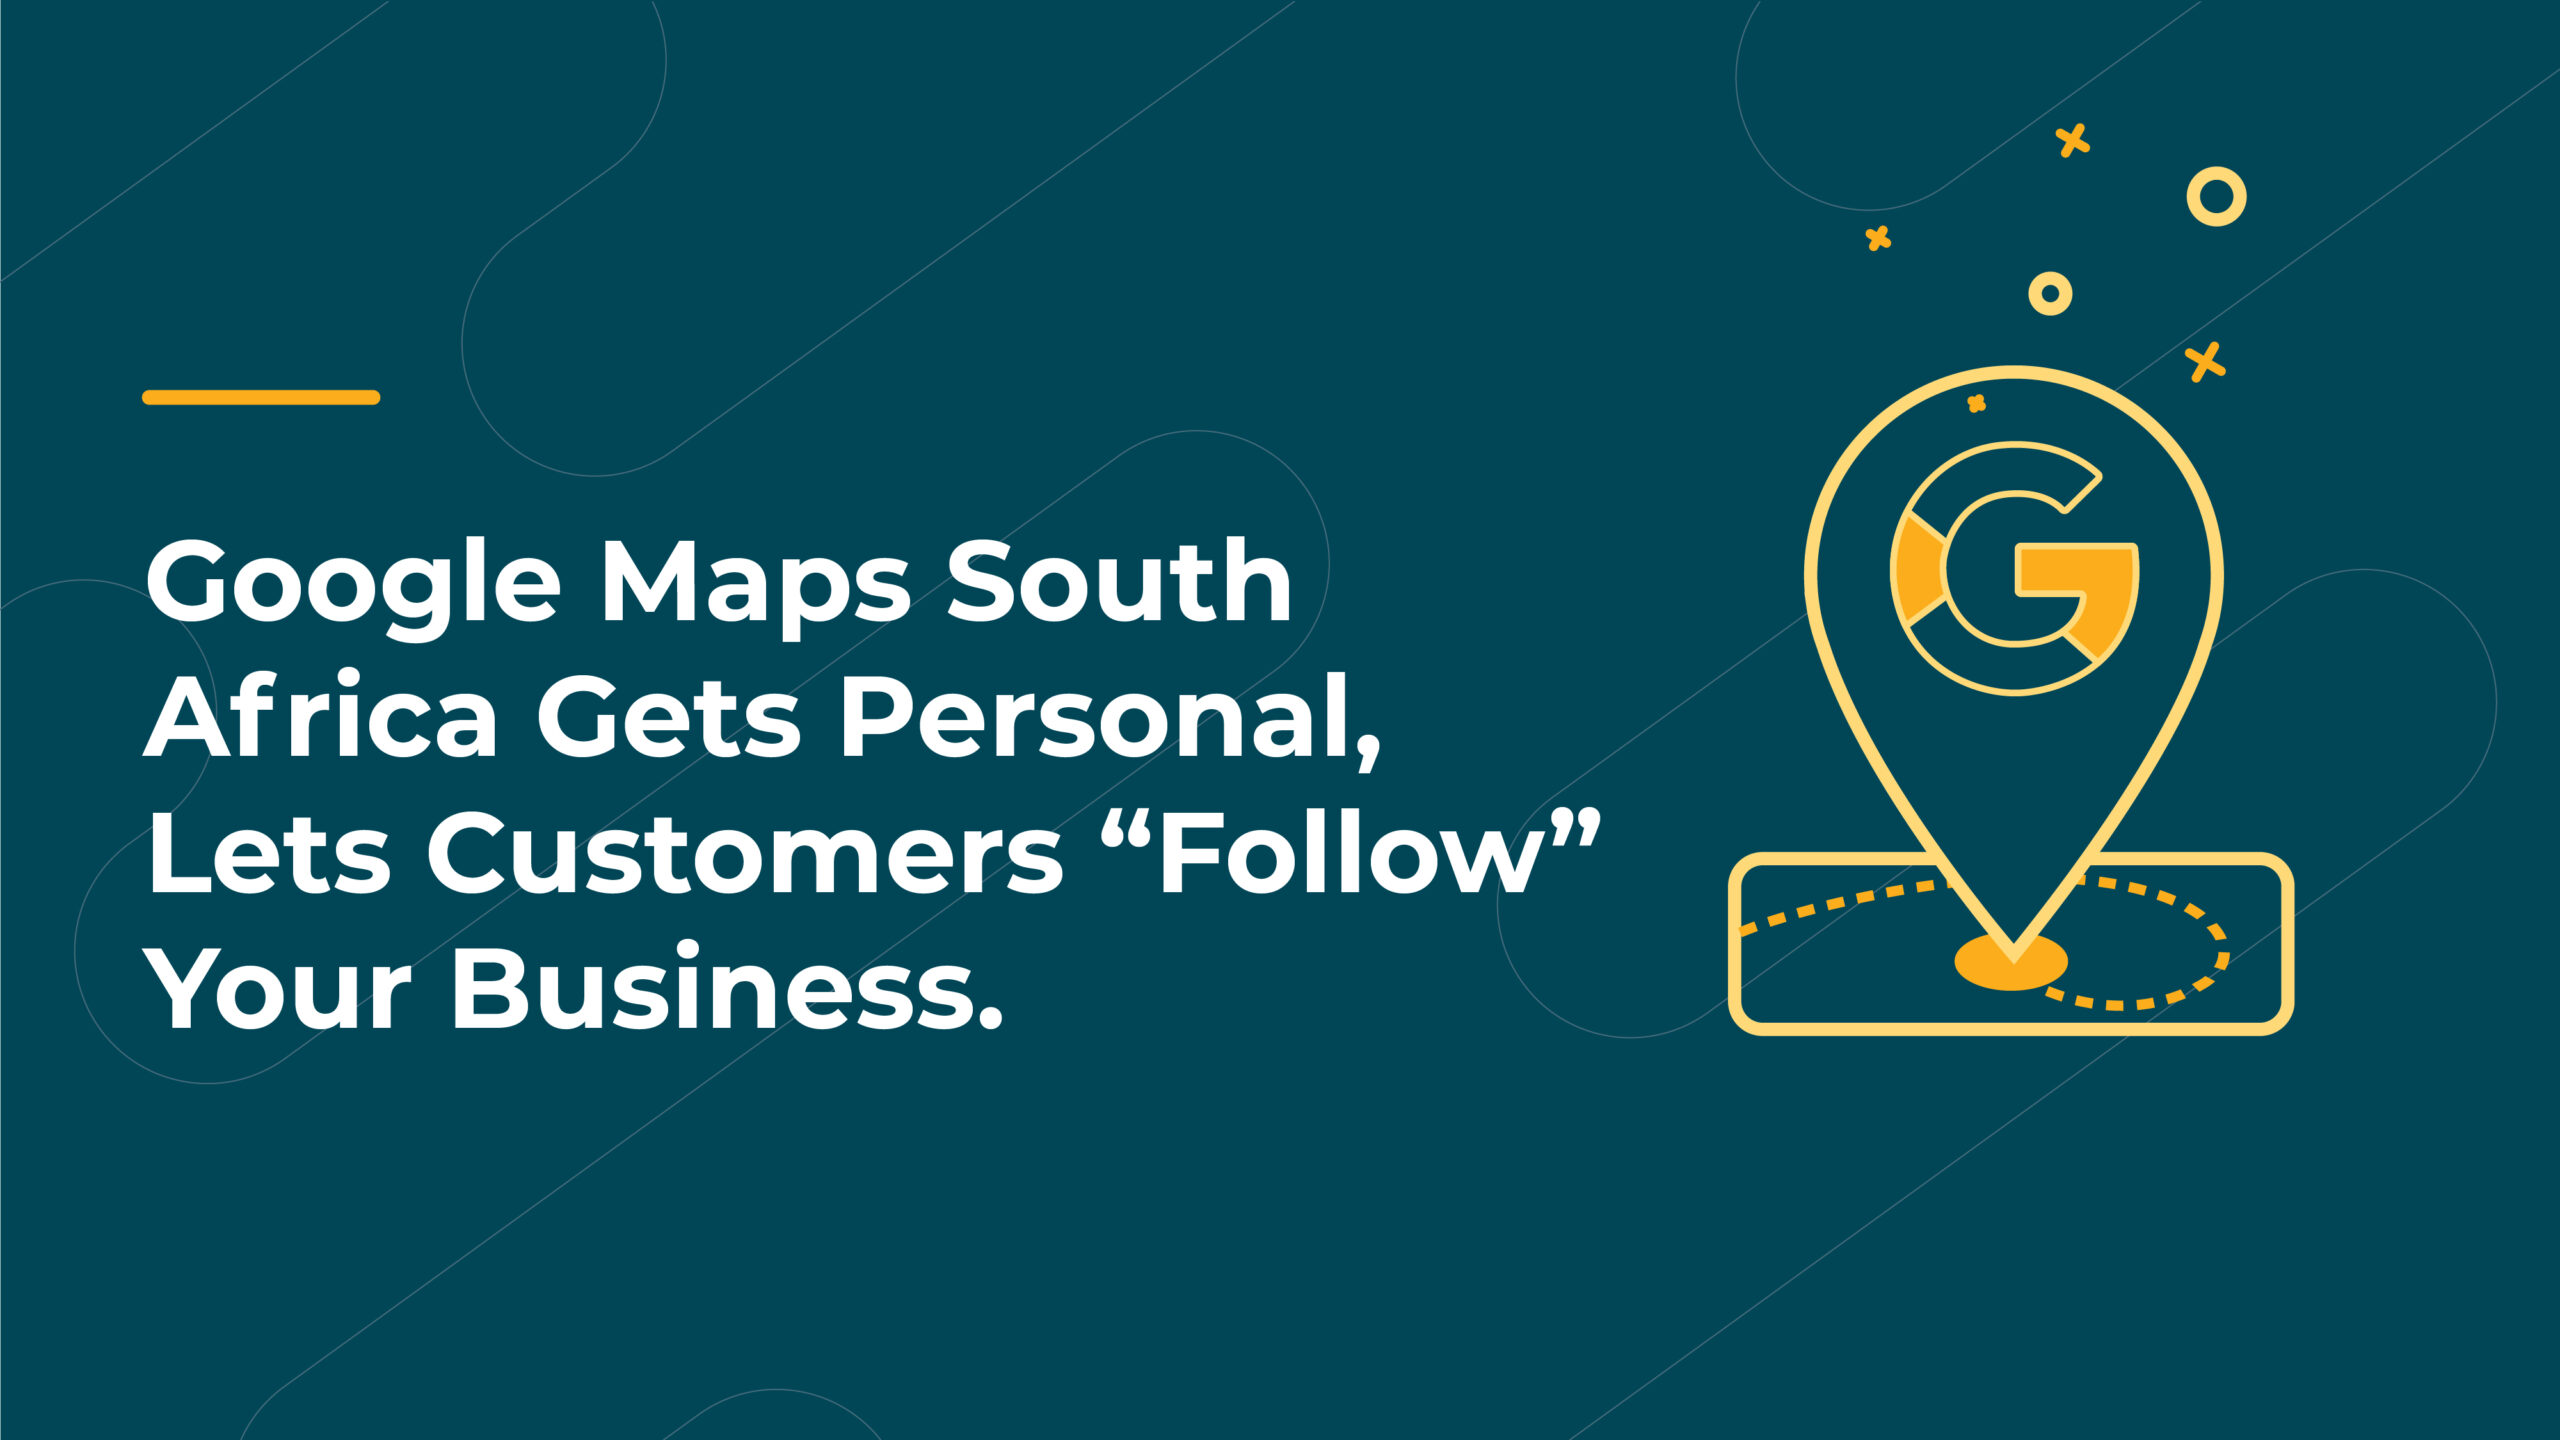 Google Maps South Africa Gets Personal, Lets Customers &#8220;Follow&#8221; Your Business